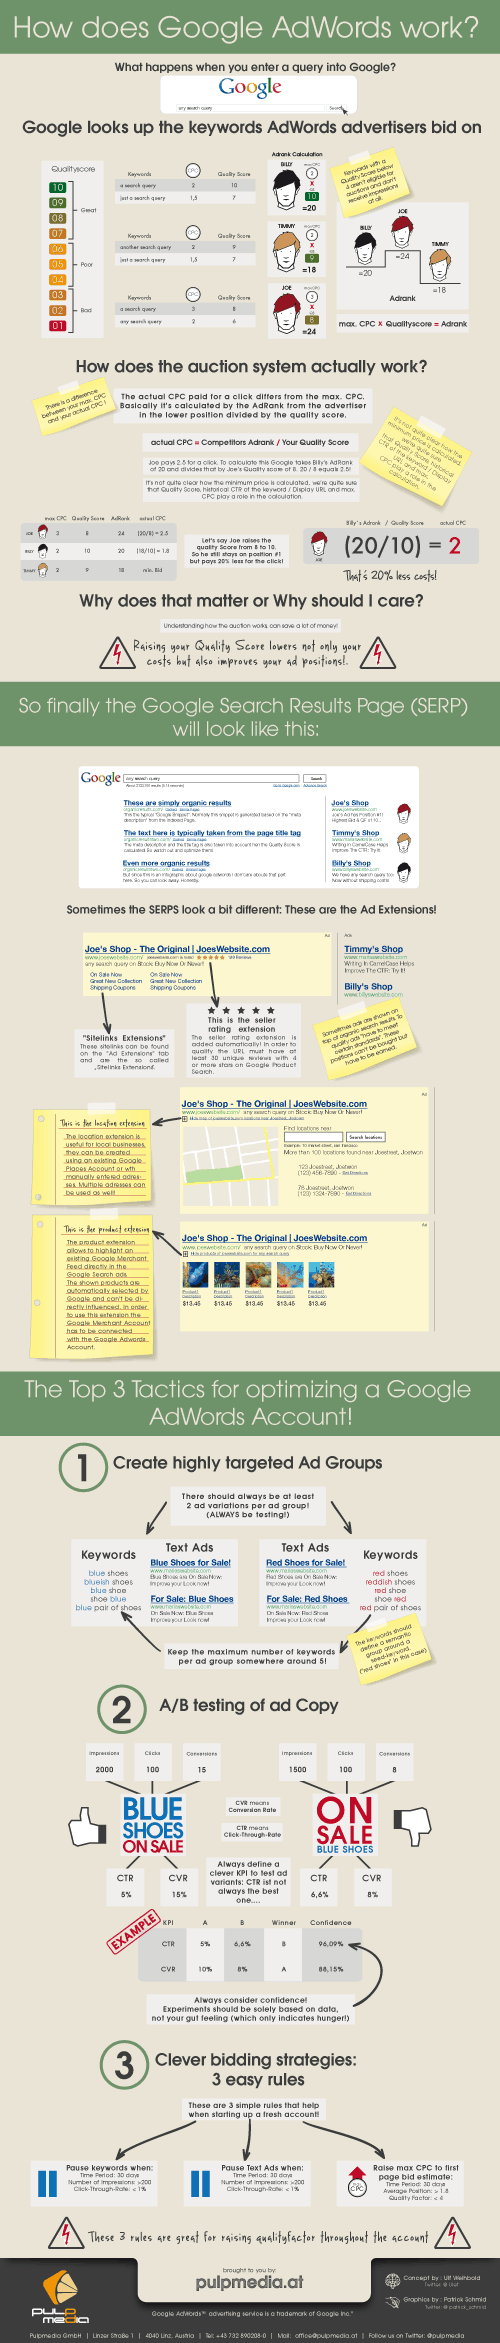 How does Google AdWords work? - infographic